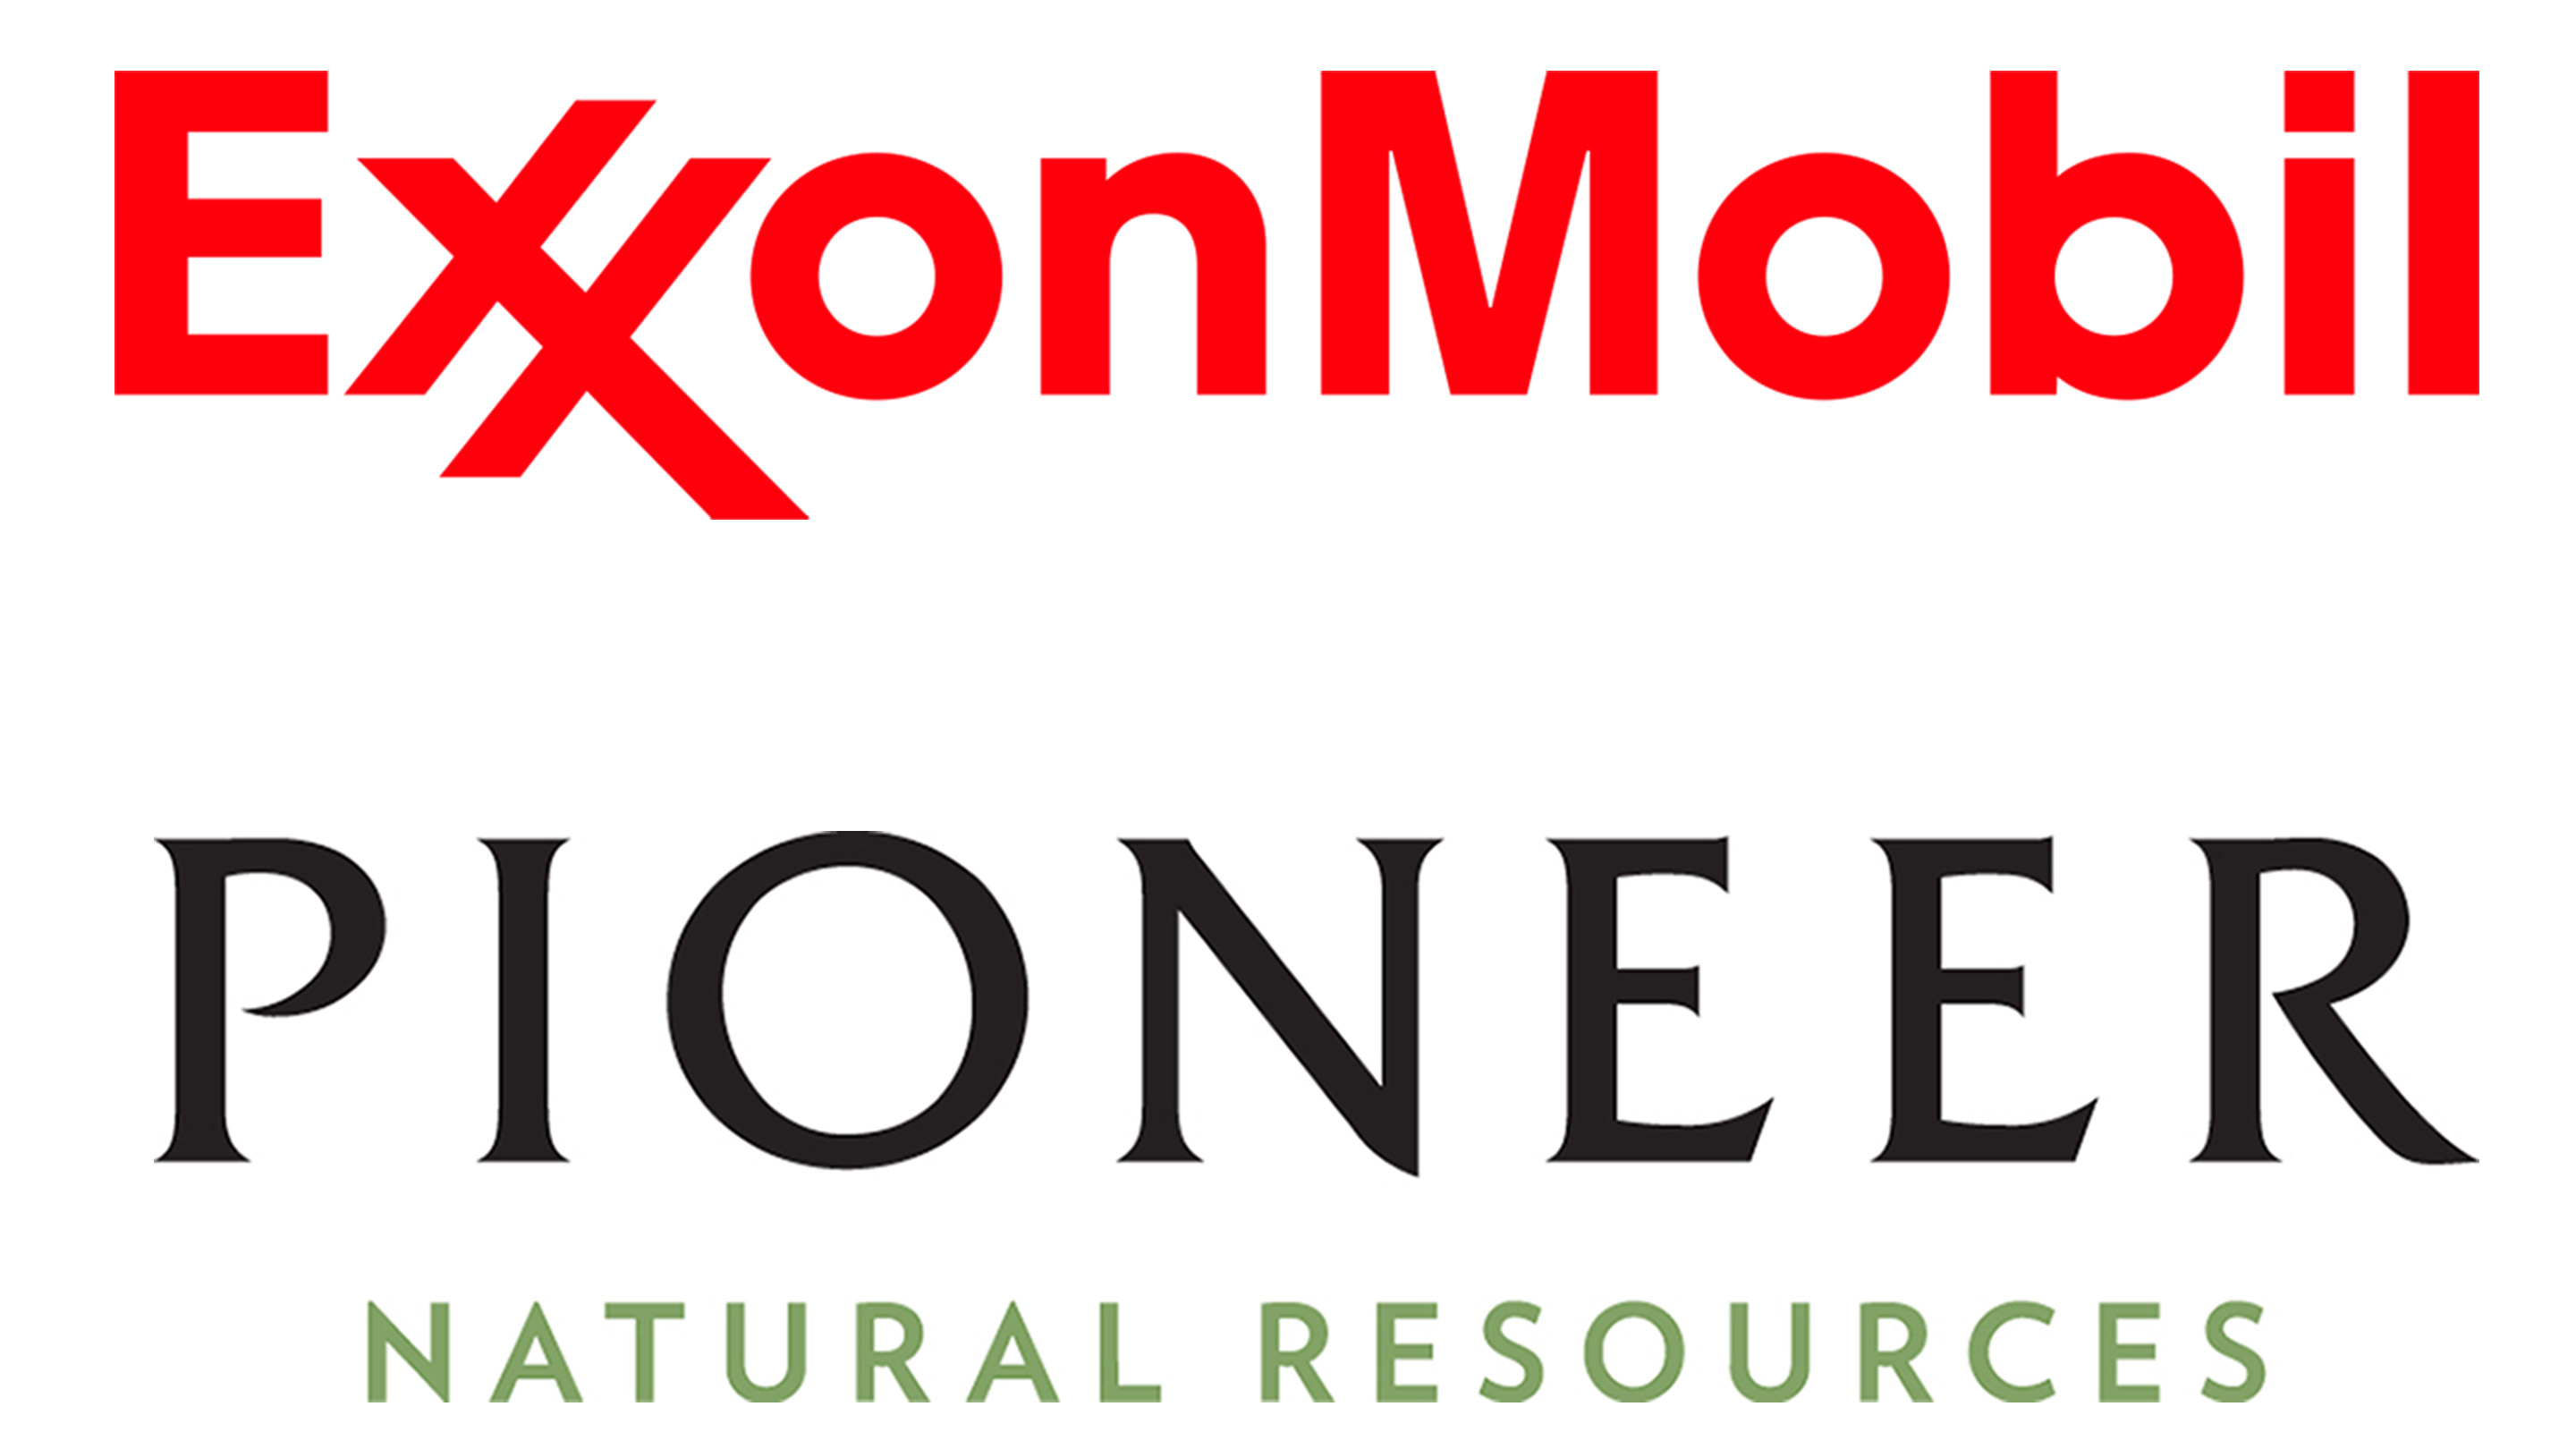 ExxonMobil and Pioneer Natural Resources logos for 10-11-2023 press release